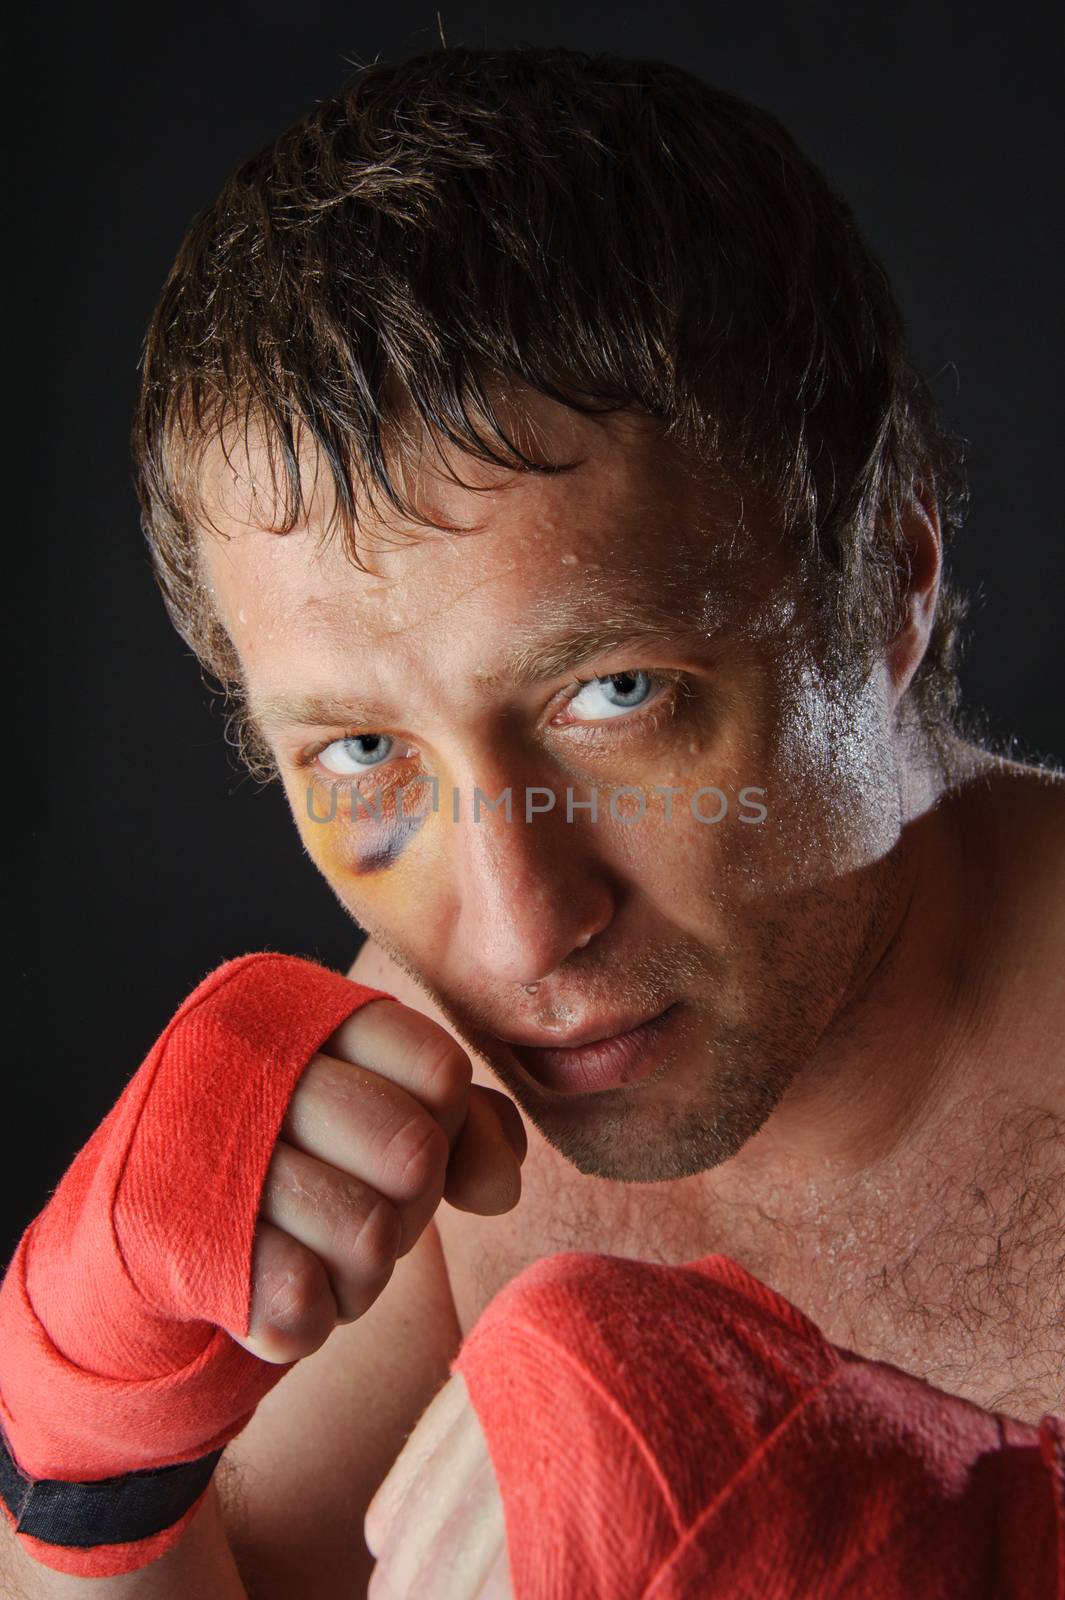 Portrait of a man with a black eye in a battle position. Clenched fists. Dark background.